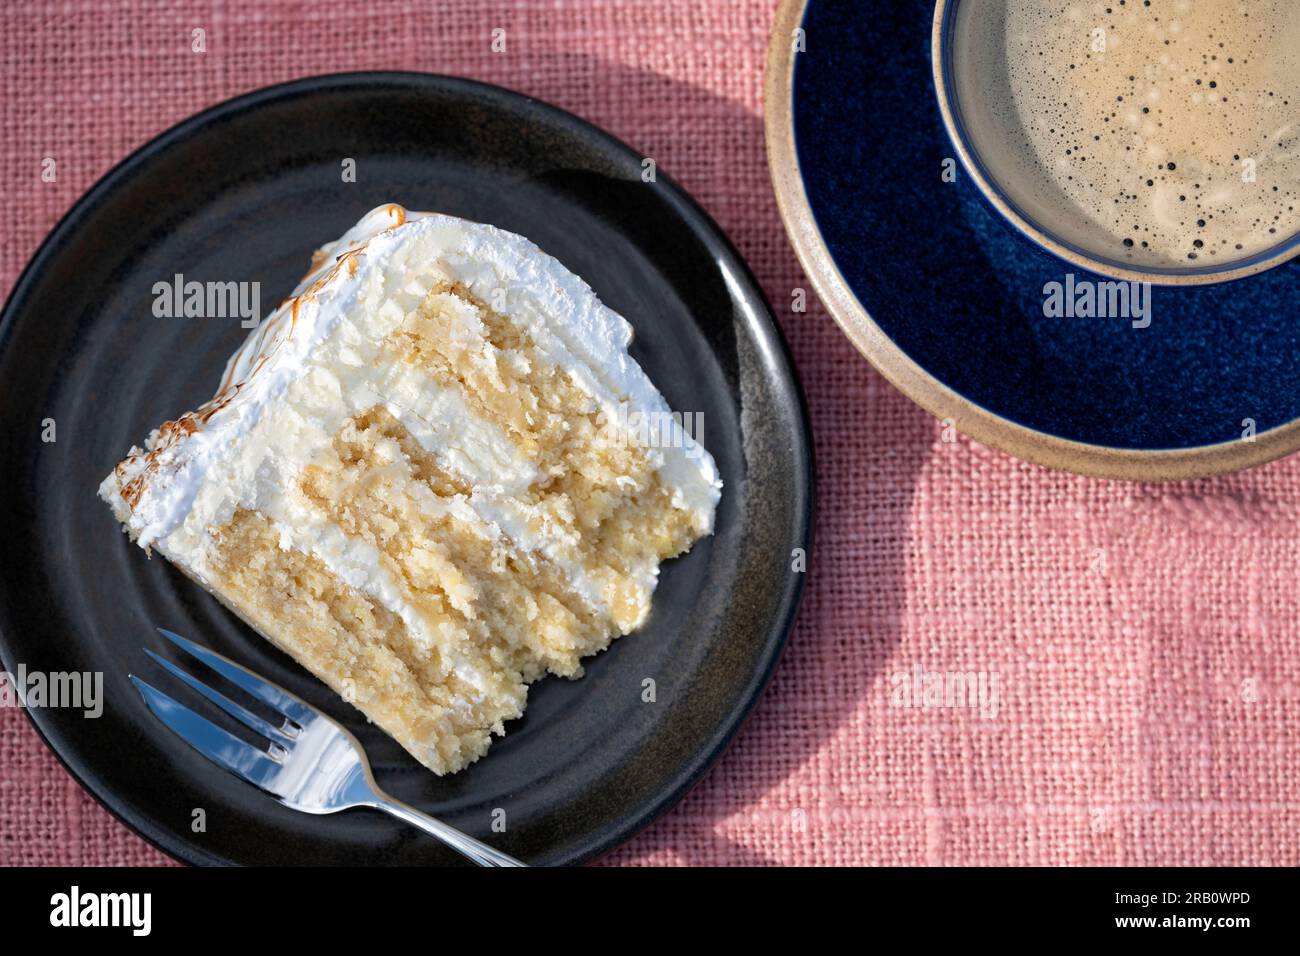 A single plated serving of a home made lemon meringue cake served to a table plated. the cake has a lemon curd filling and buttercream frosting Stock Photo